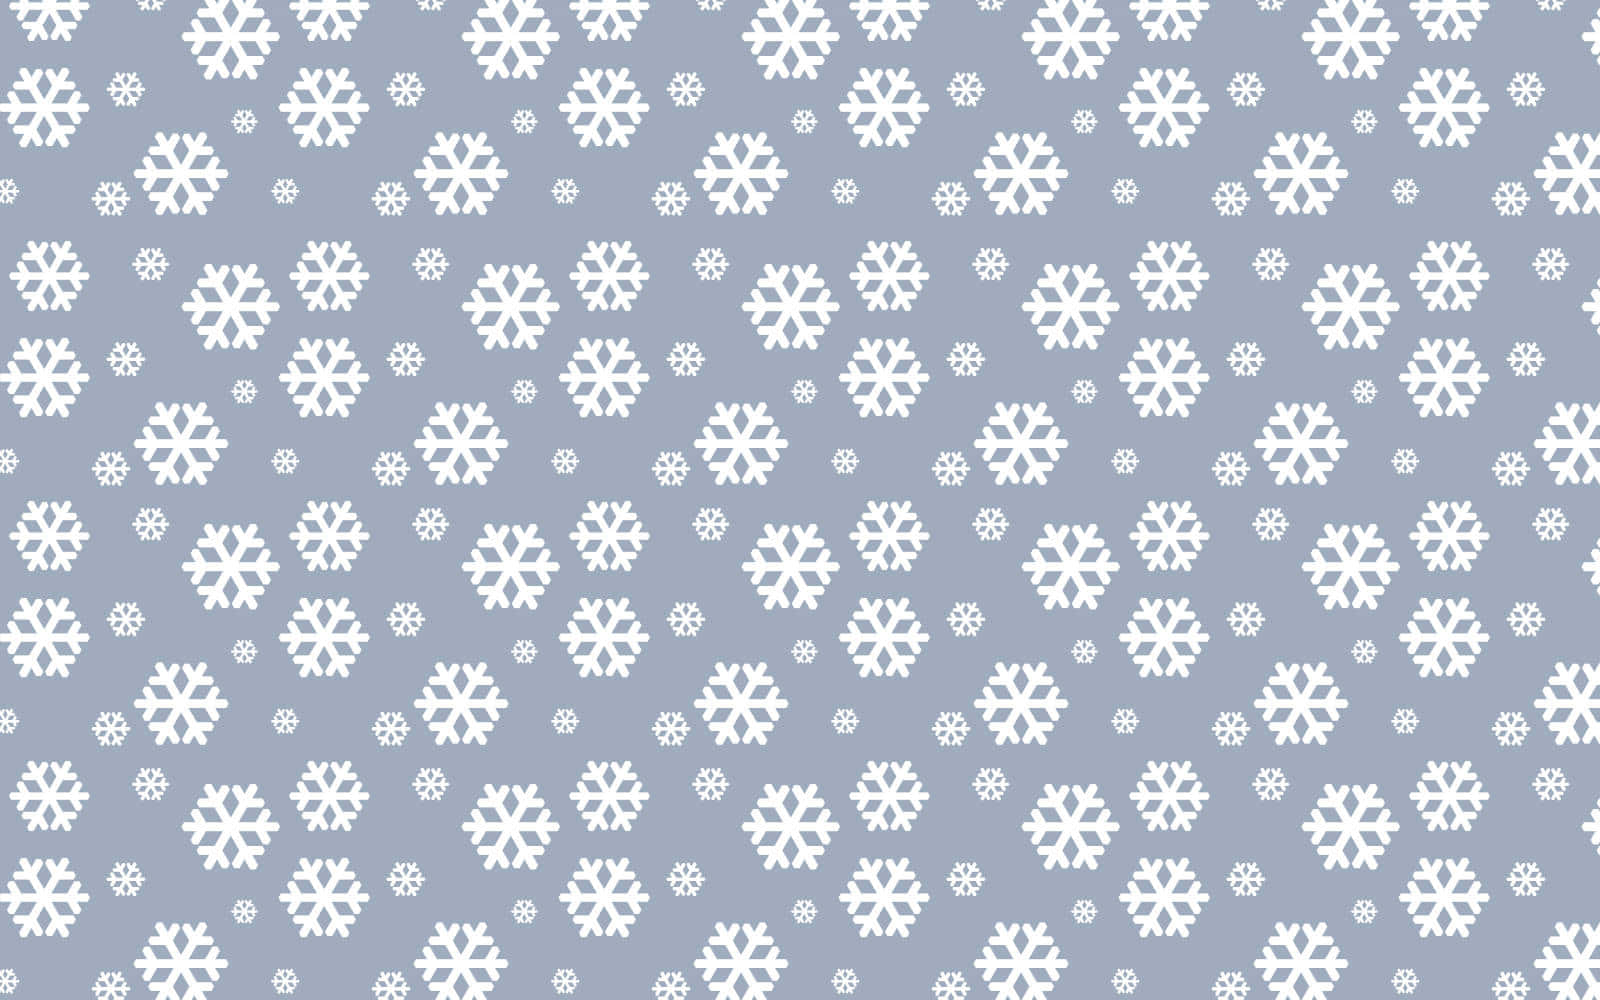 Snowflakes Background In Pattern Design